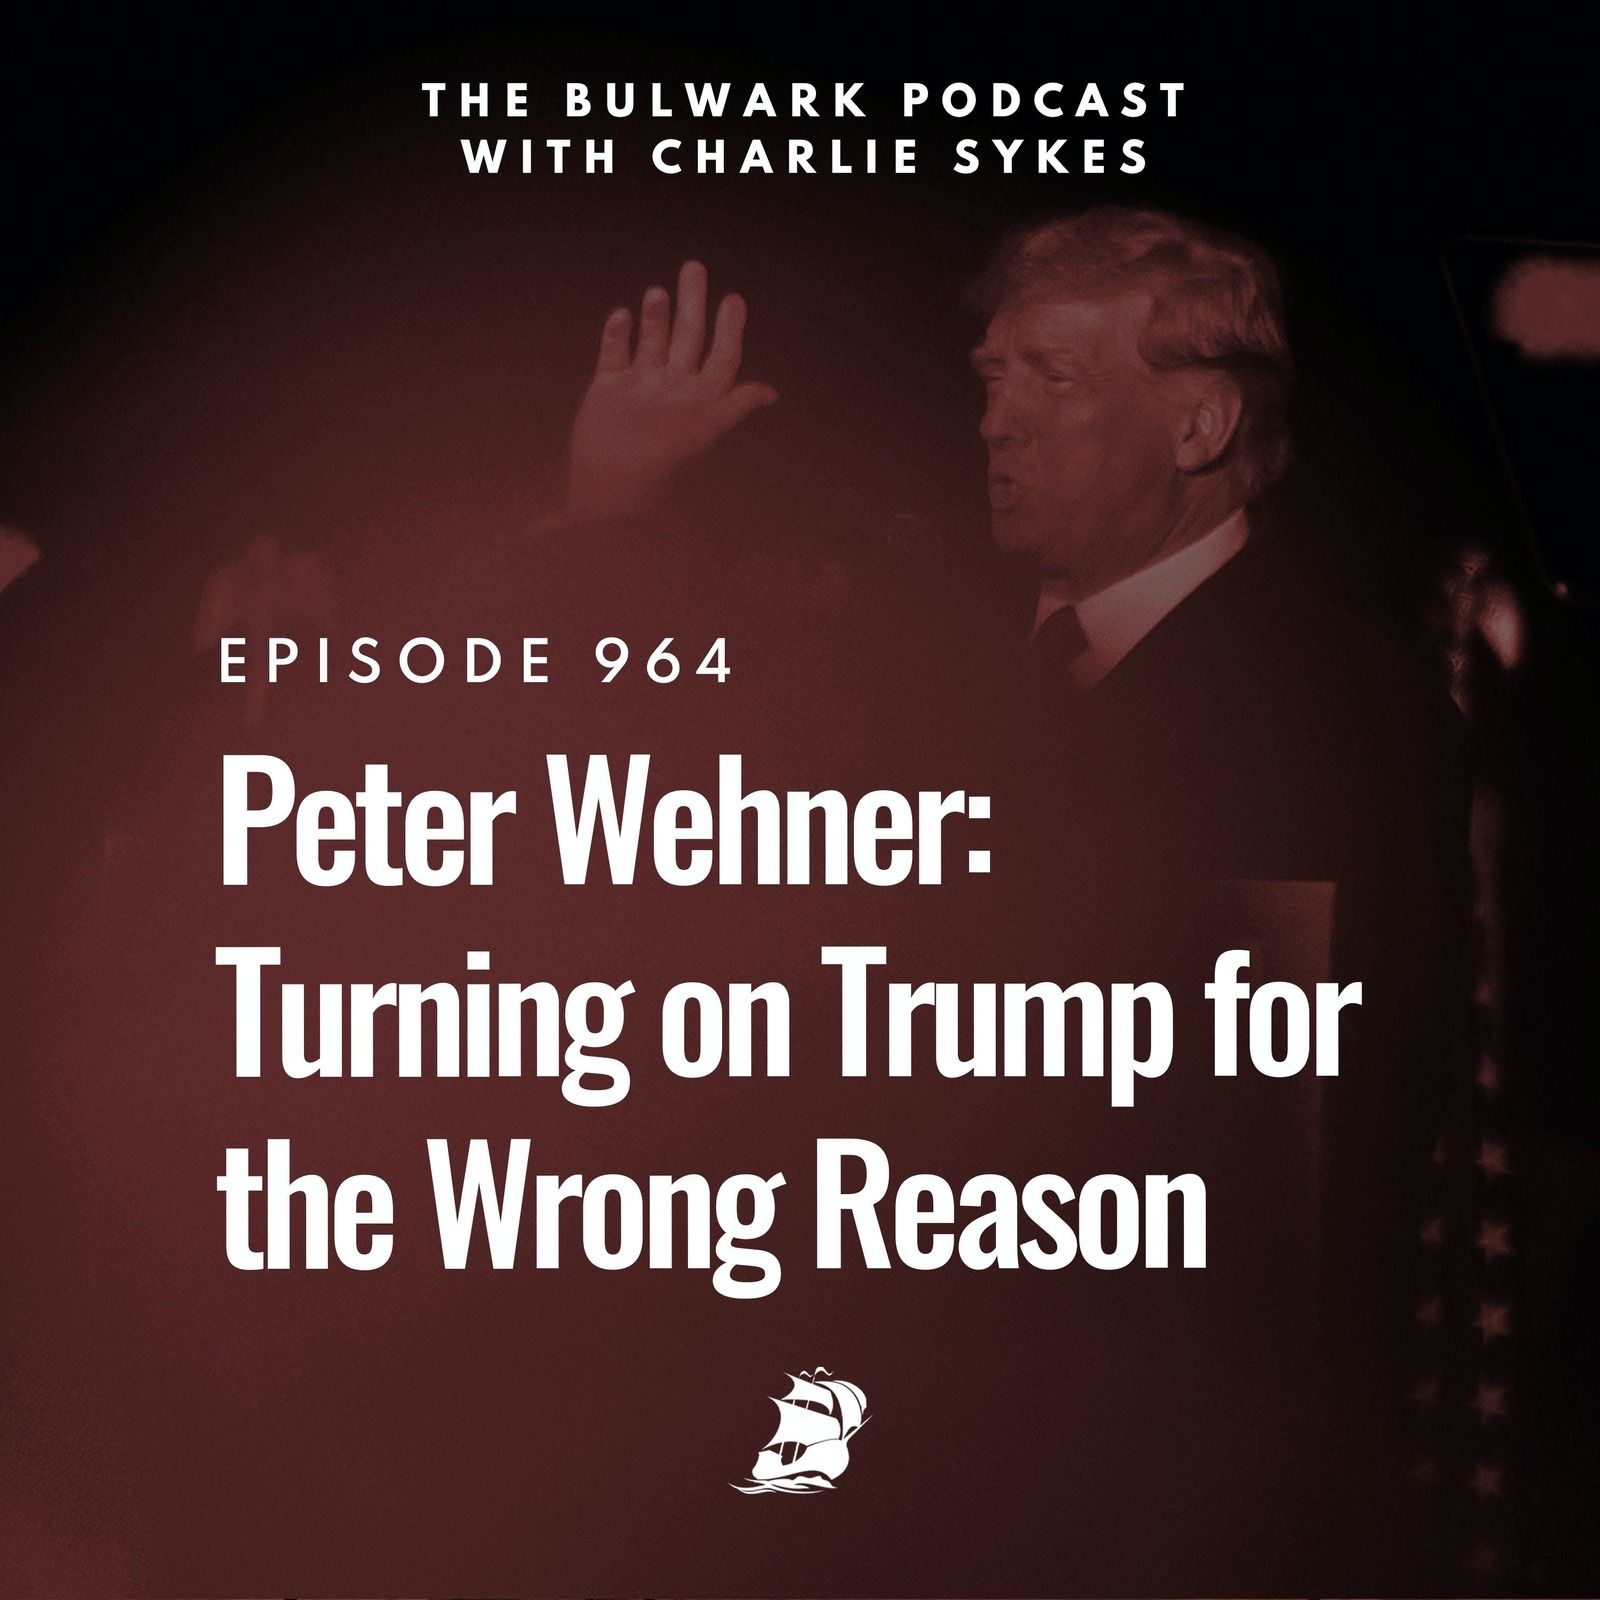 Peter Wehner: Turning on Trump for the Wrong Reason